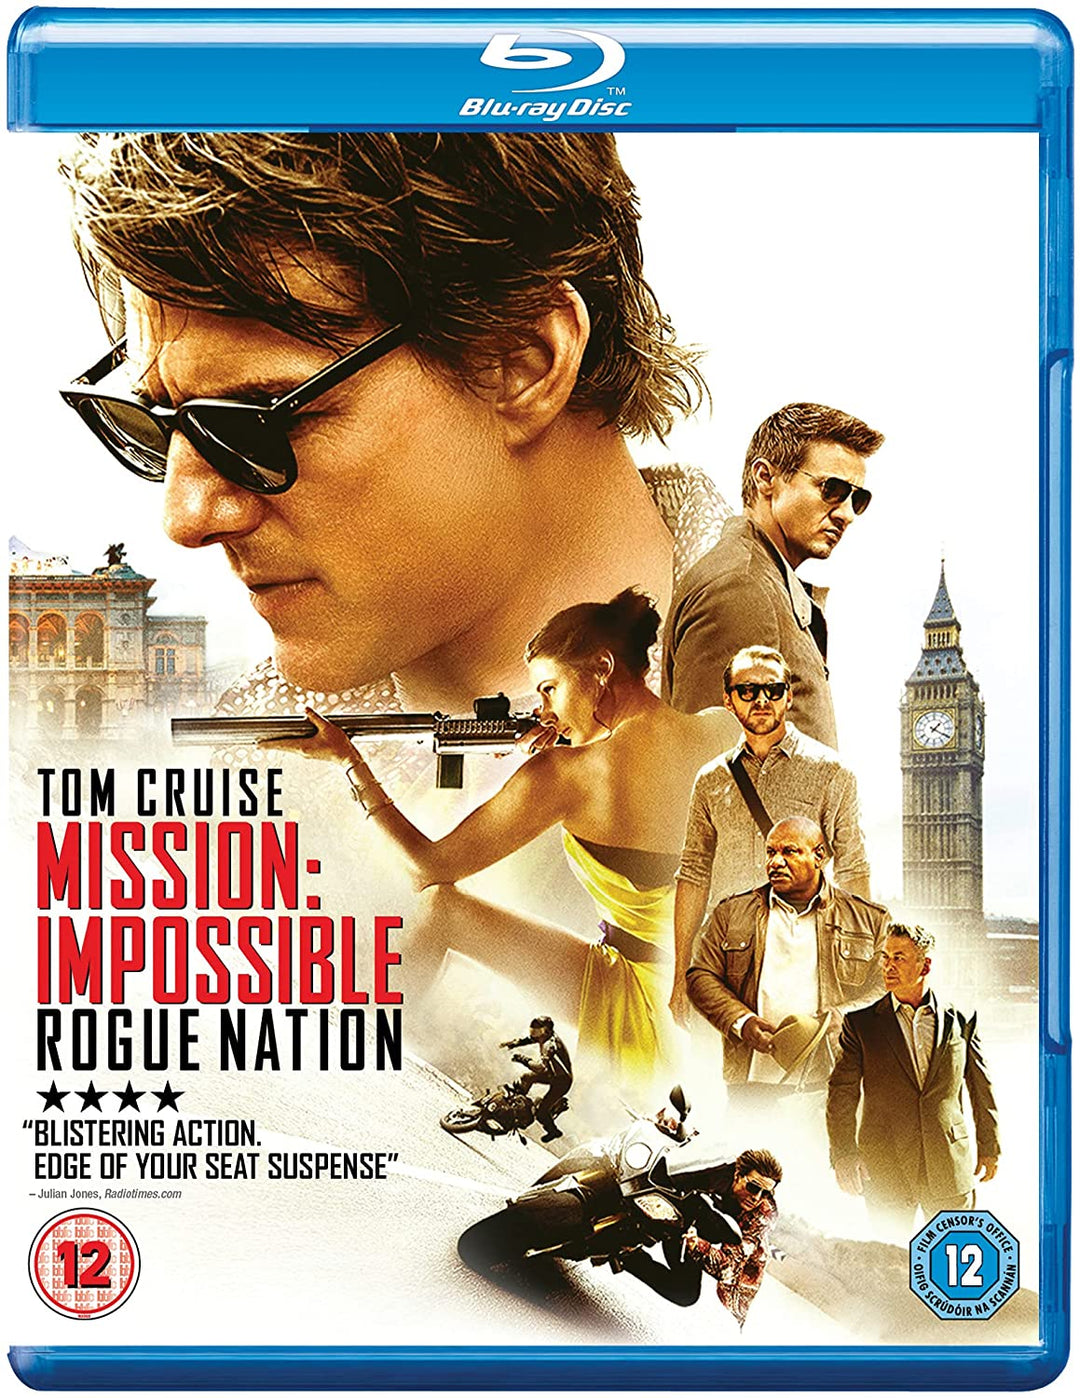 Mission: Impossible - Rogue Nation [Blu-ray] [2017] [Region Free]